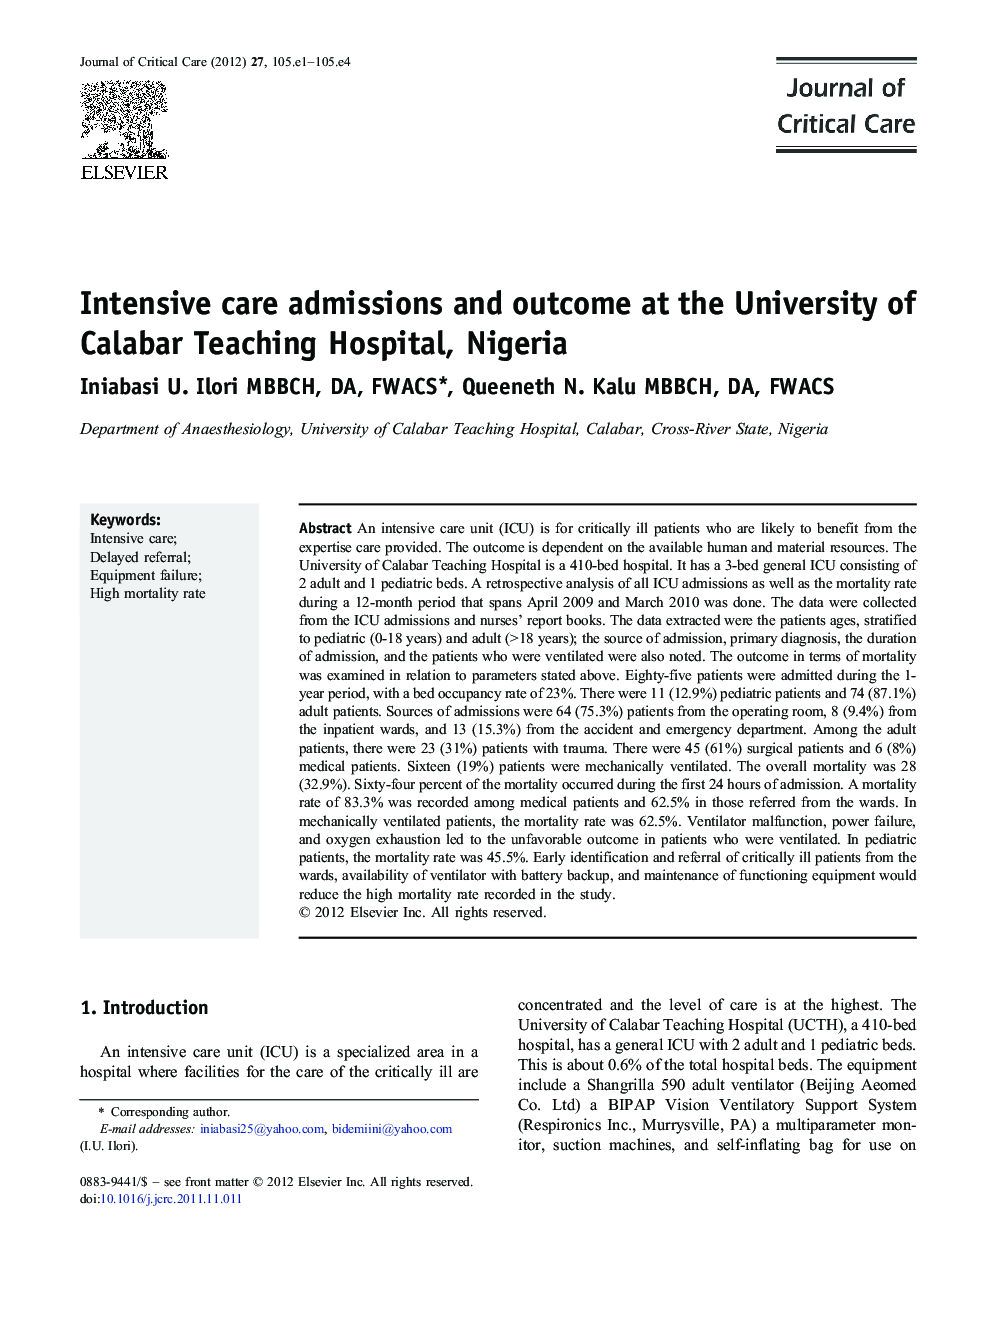 Intensive care admissions and outcome at the University of Calabar Teaching Hospital, Nigeria